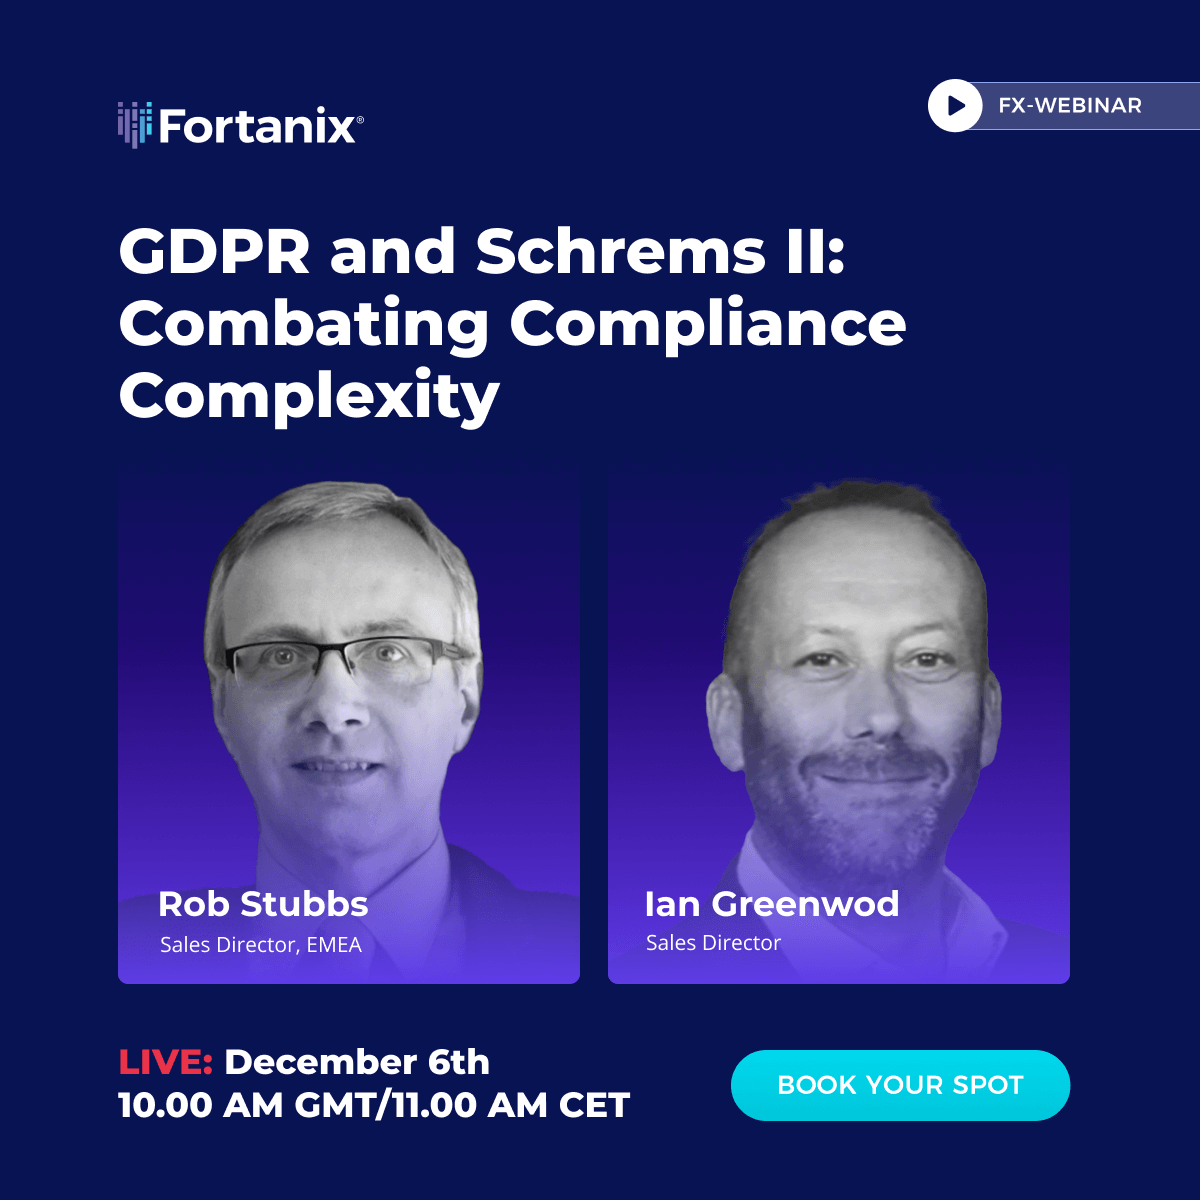 GDPR and Schrems II: Combating Compliance Complexity